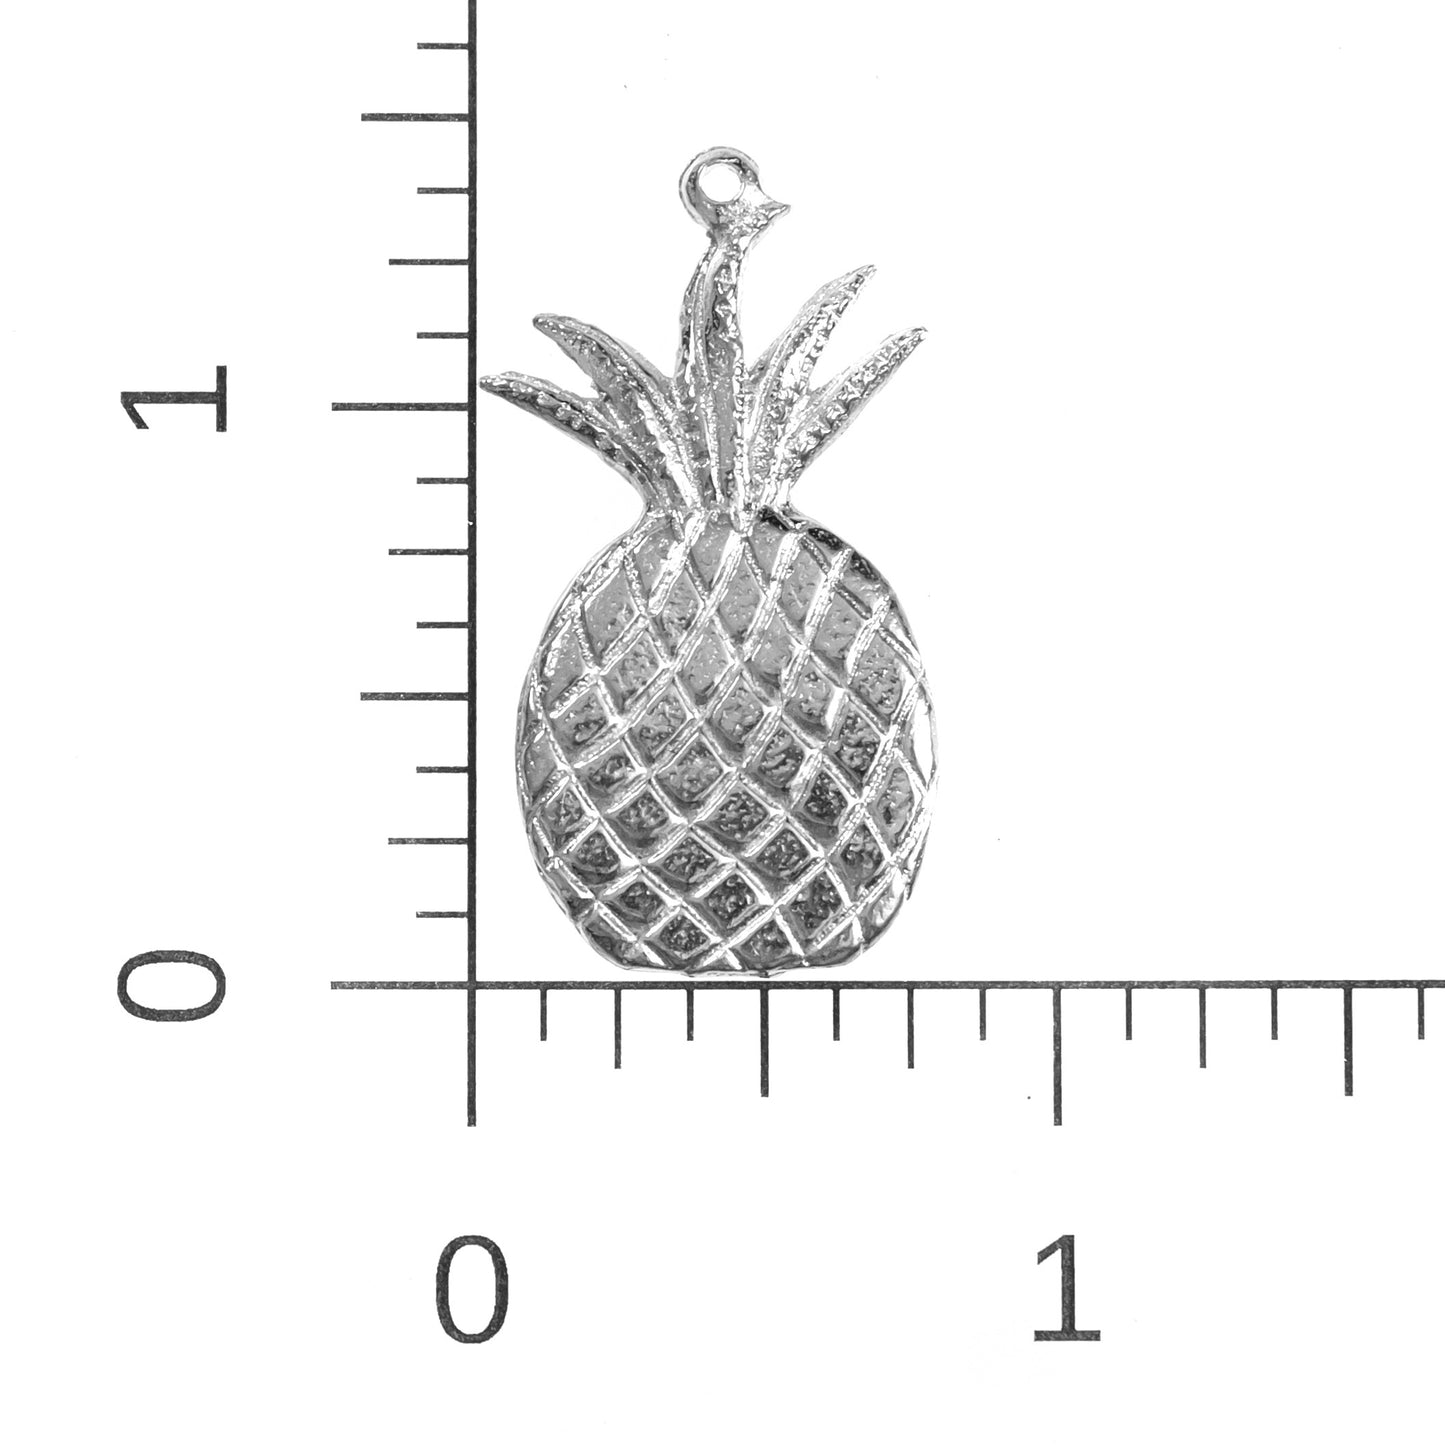 Pineapple Jewelry Gifts -Pineapple Pendant - Necklaces - Earrings - Keychain